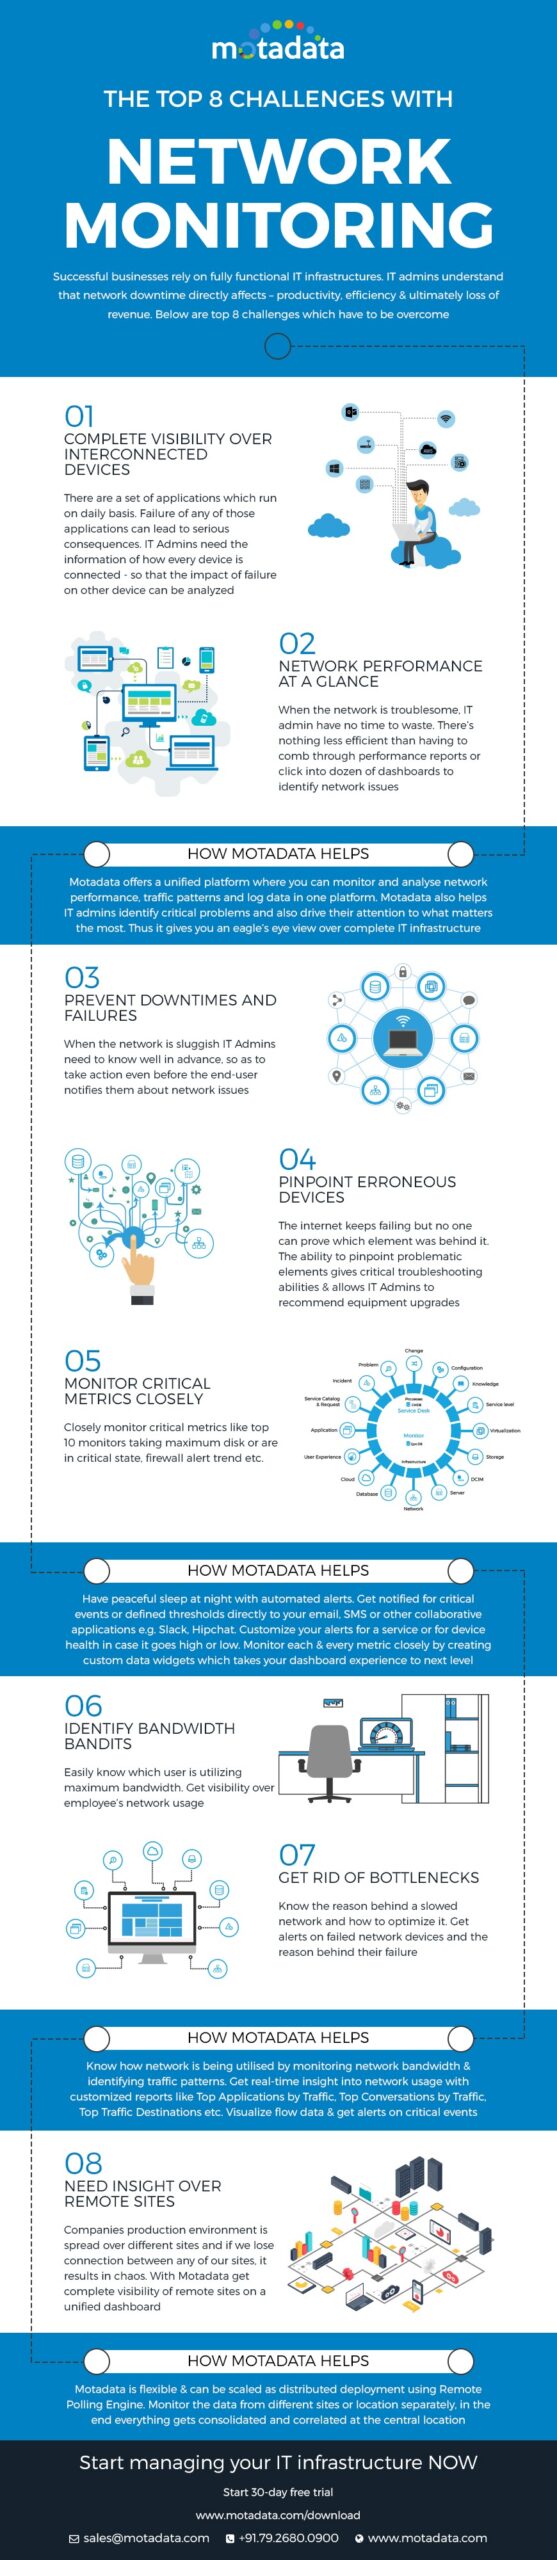 Network Monitoring Challenges Infographic